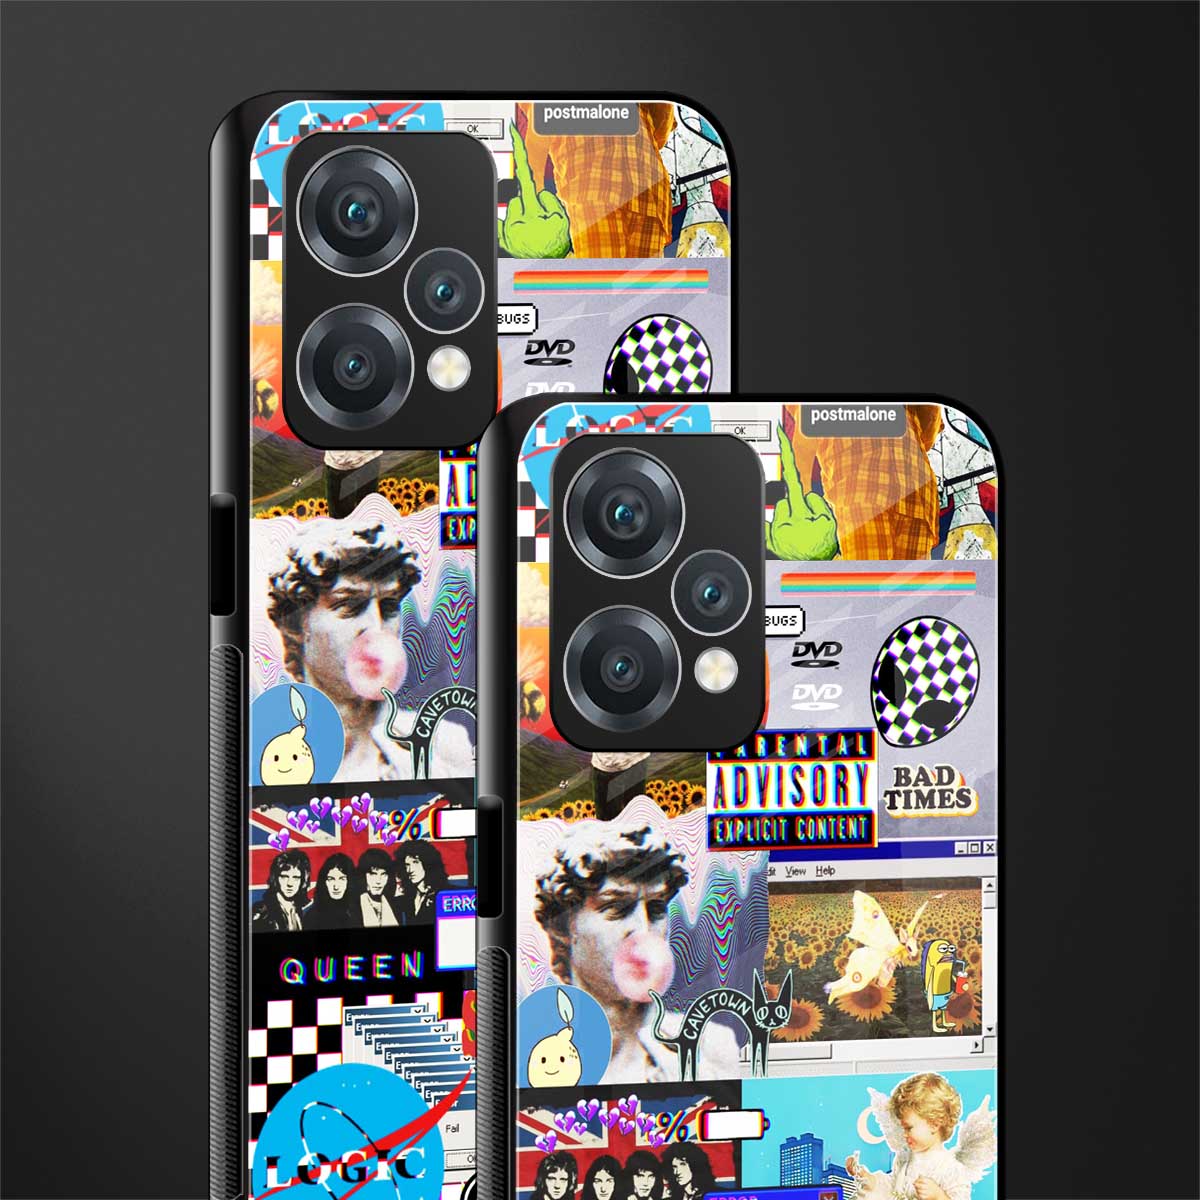 y2k collage aesthetic back phone cover | glass case for oneplus nord ce 2 lite 5g